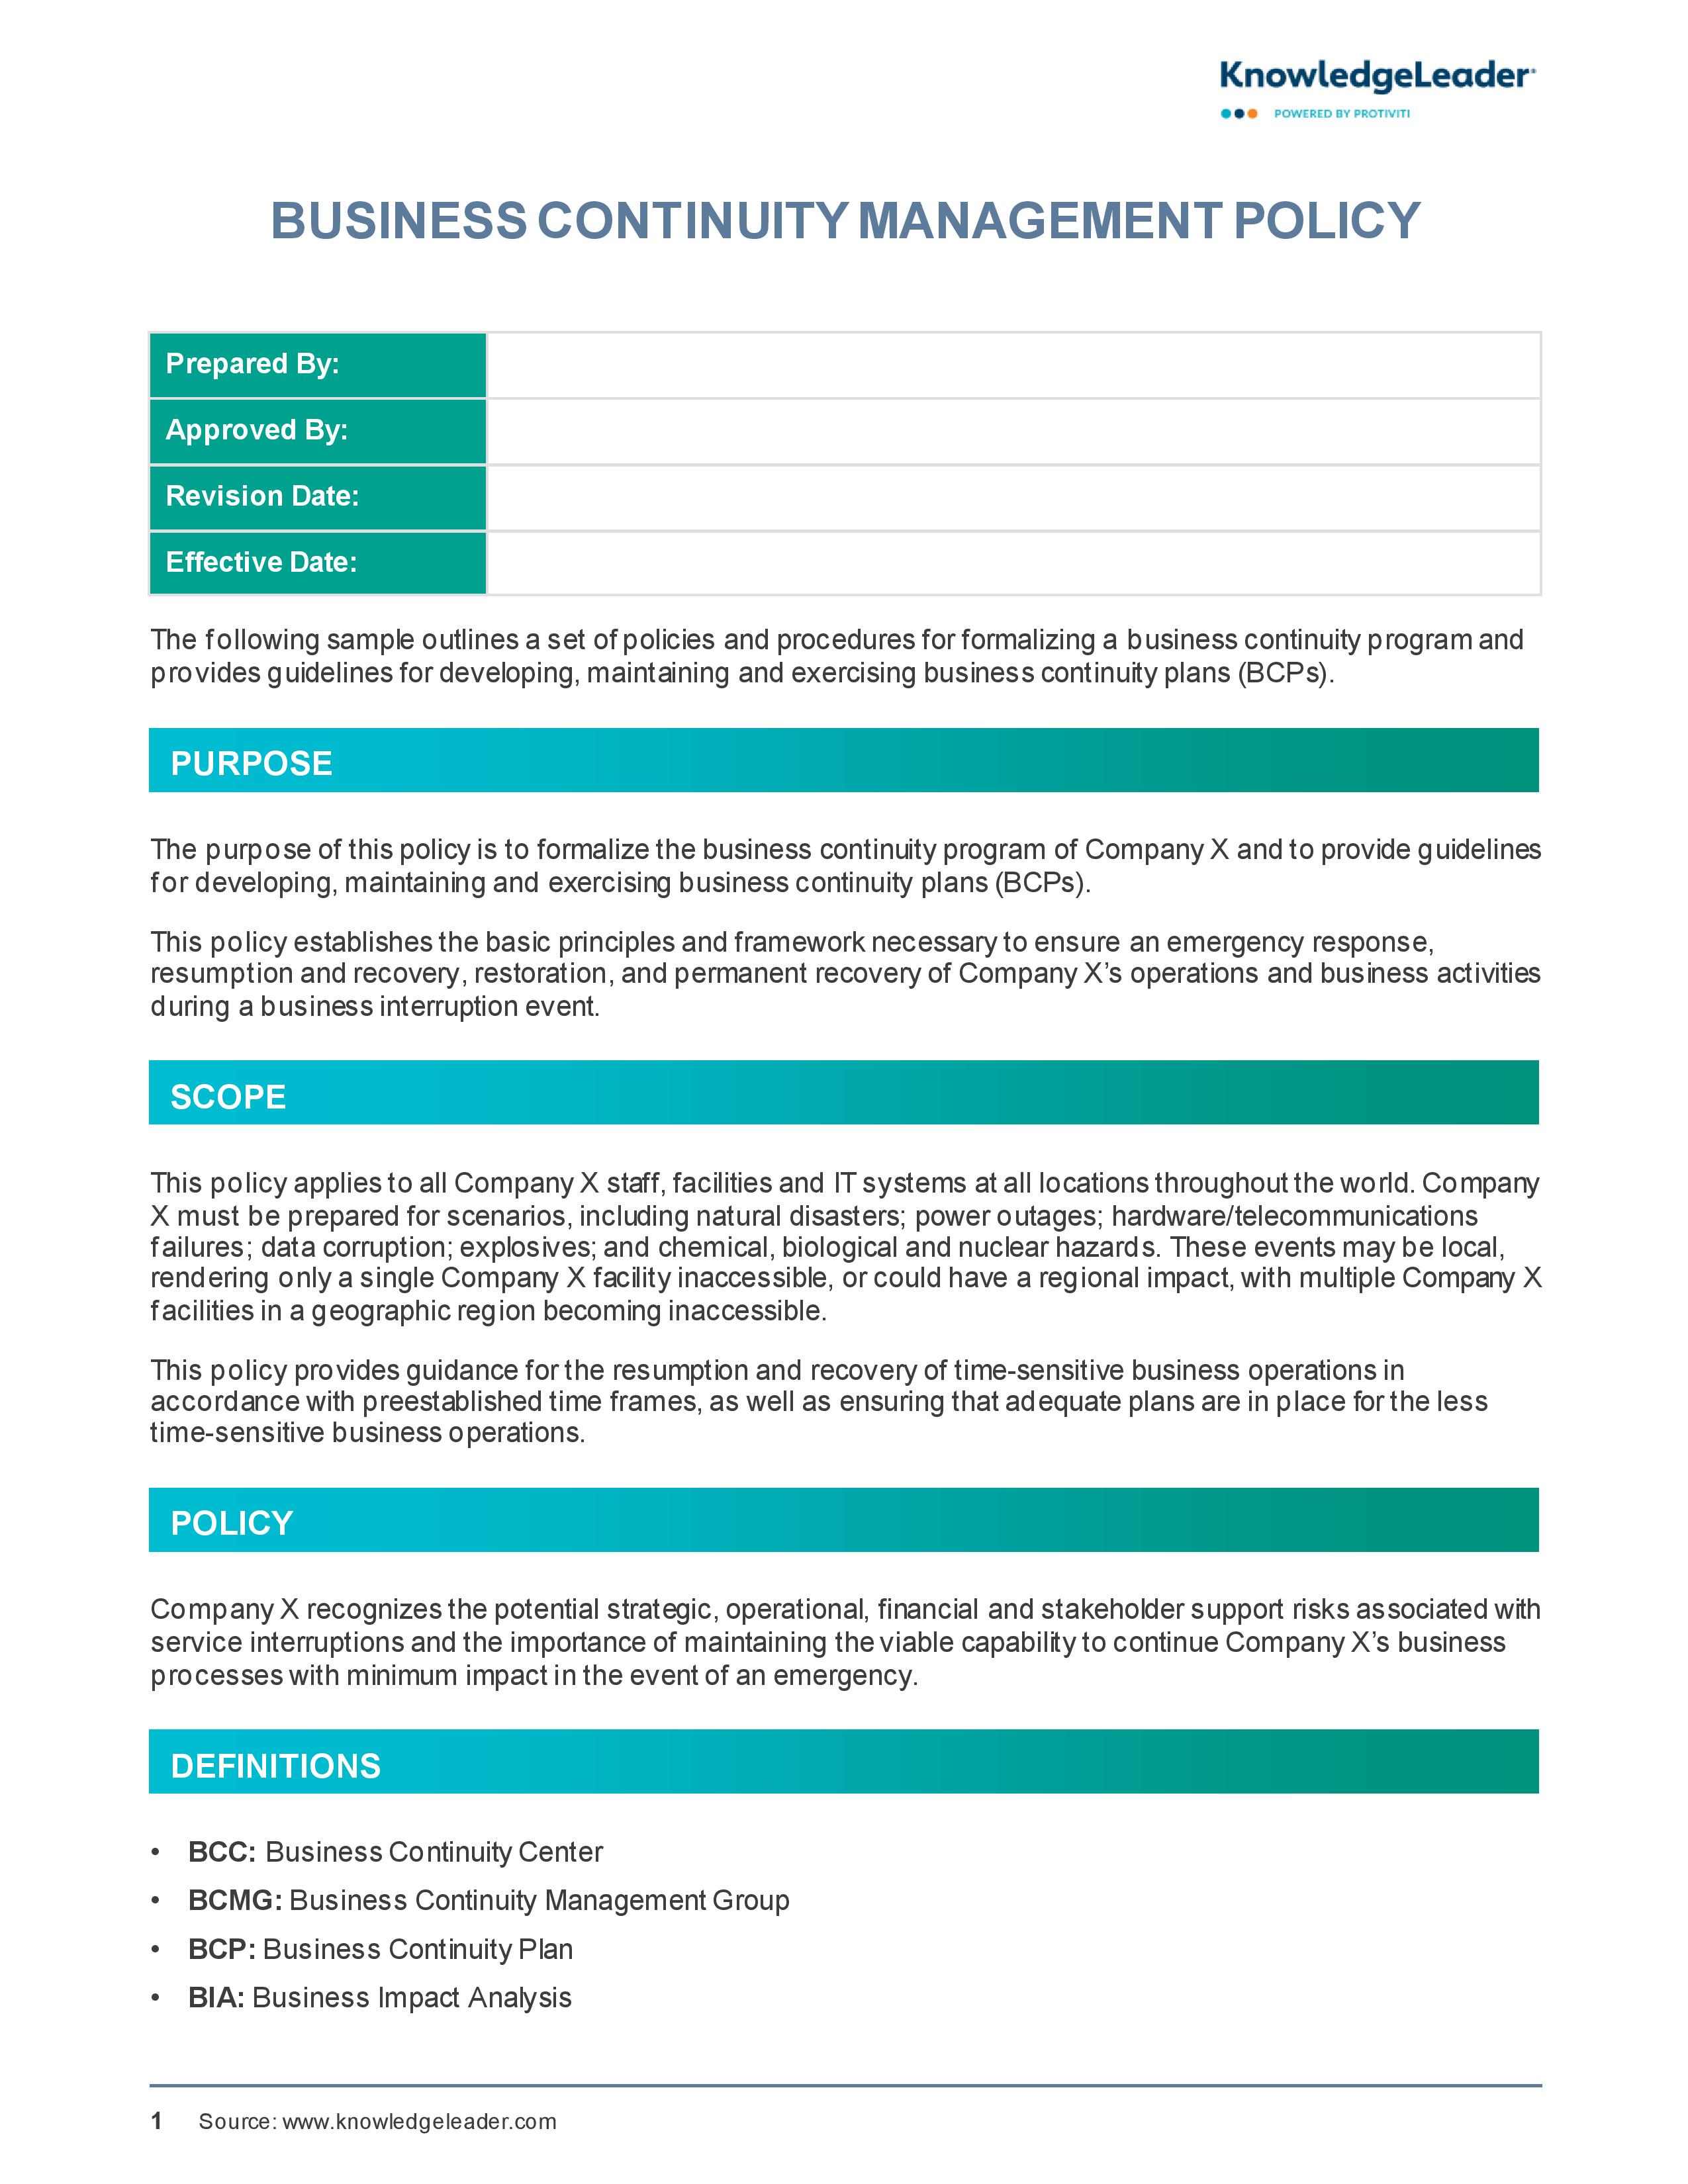 Screenshot of the first page of Business Continuity Management Policy